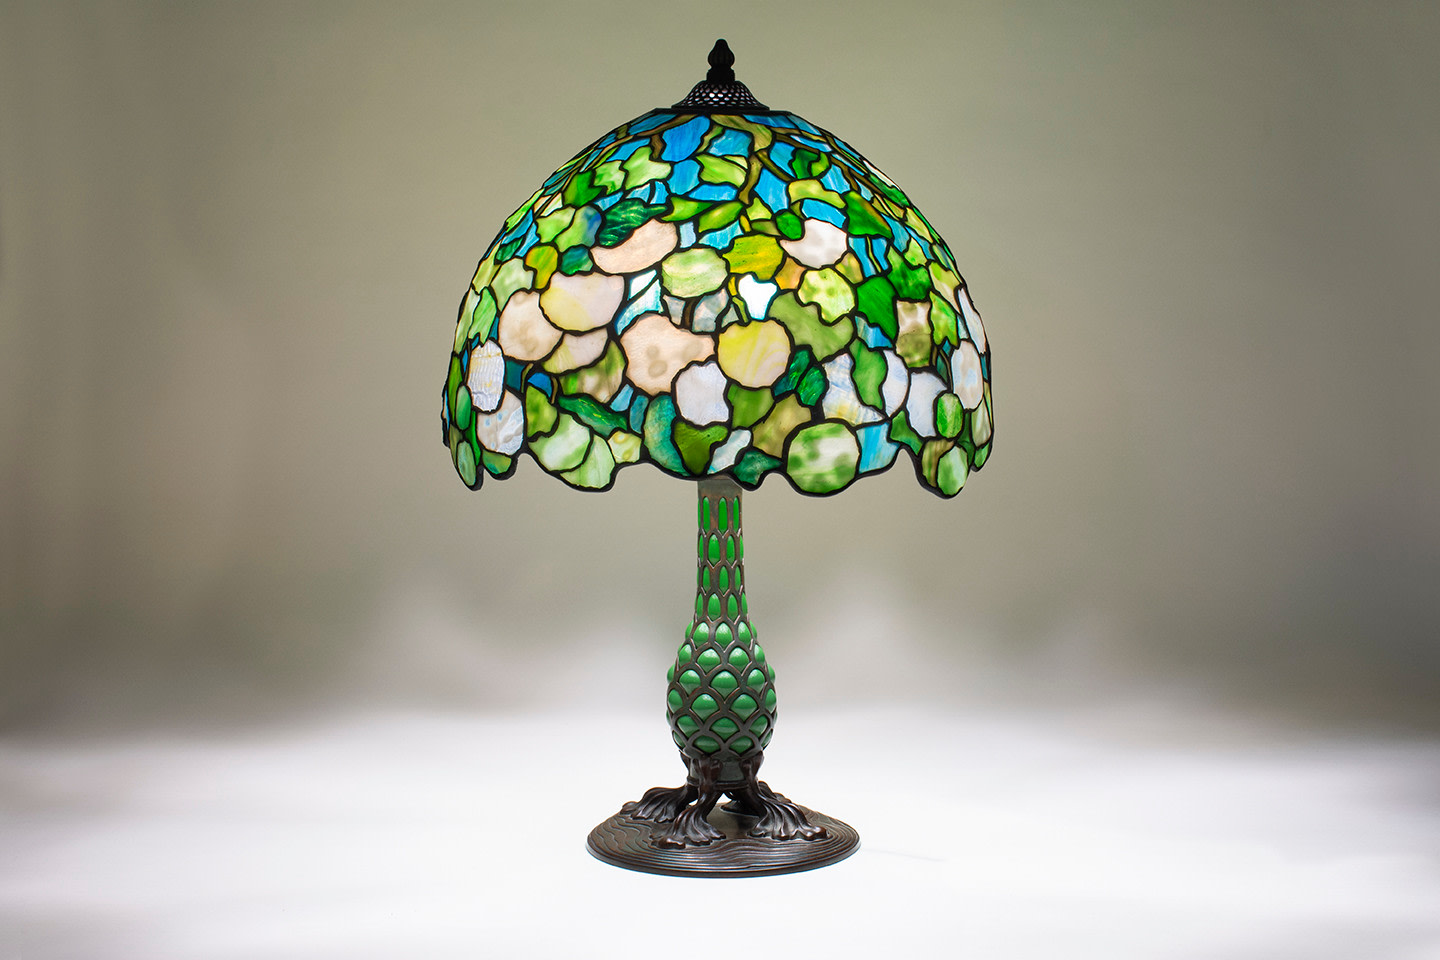 a leaded glass tiffany lamp, the shade depicting a snowball or viburnum bush with rounded blossoms formed by mottled white tiffany glass with green rippled glass leaves against a background representing blue sky, on a &quot;pineapple&quot; model lamp base with green tiffany glass blown through an openwork armature of metal.